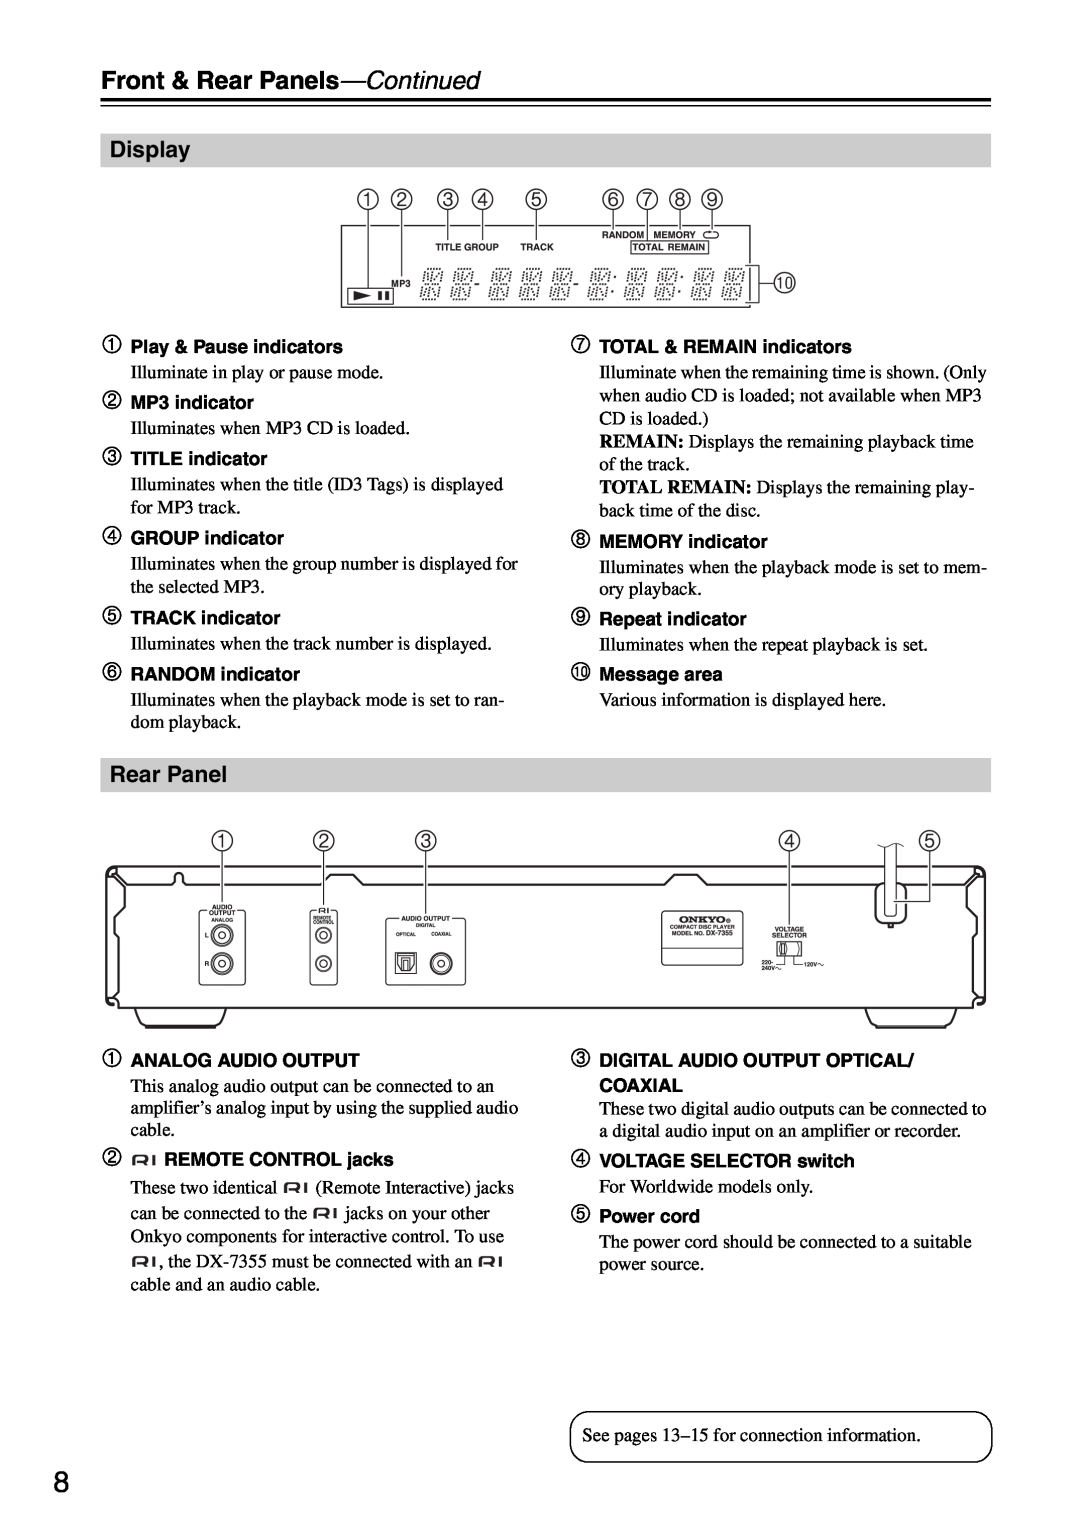 Onkyo DX-7355 instruction manual     , Front & Rear Panels-Continued, Display 